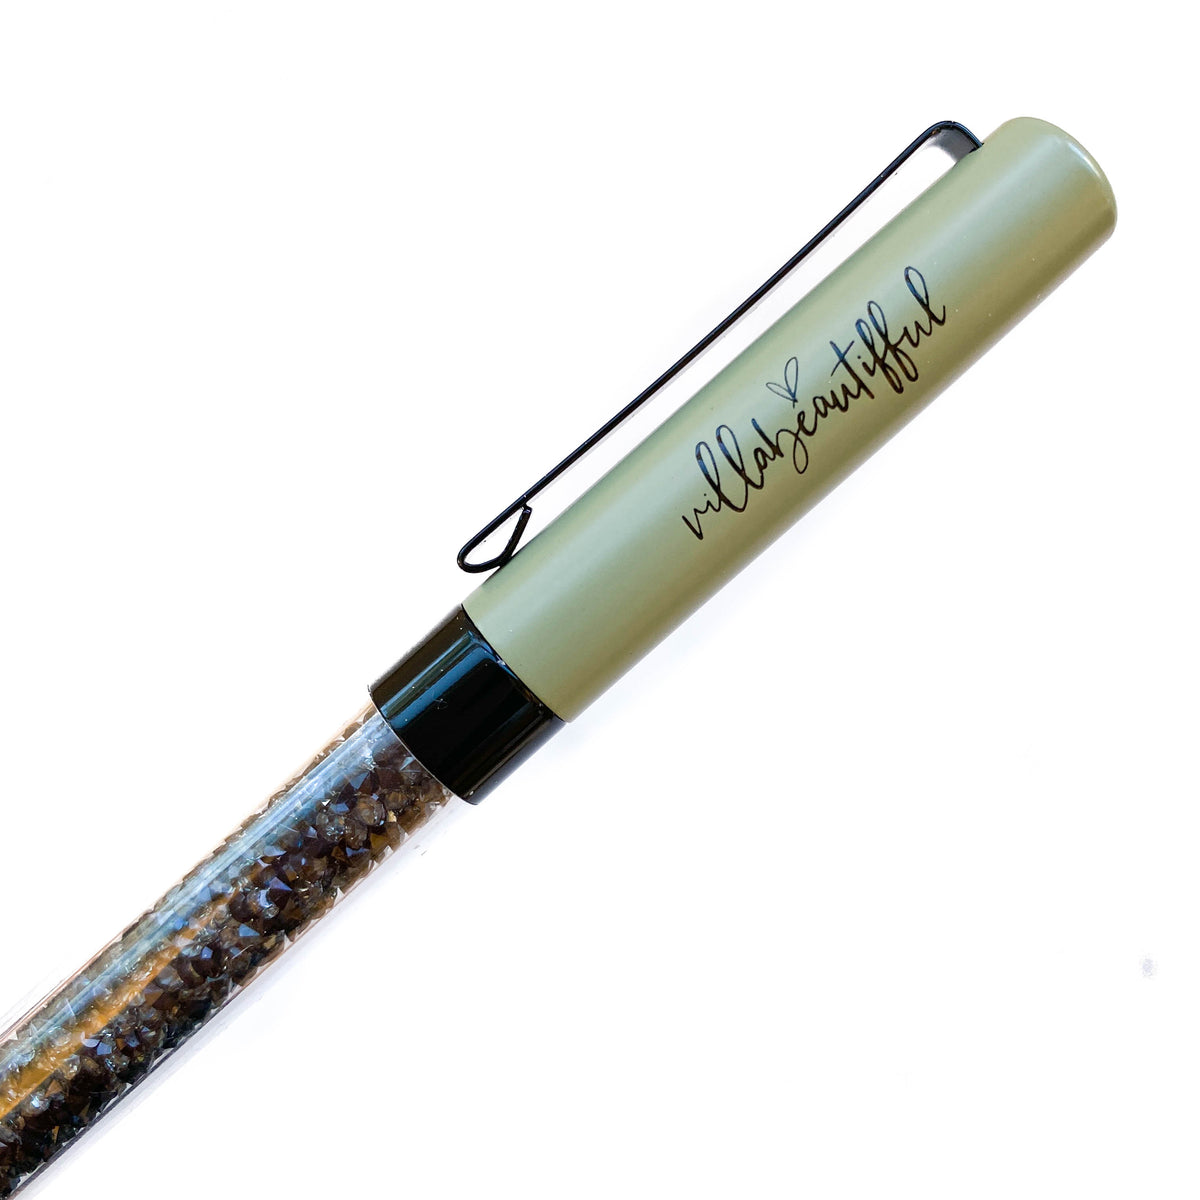 Miss Frankie Imperfect Crystal VBPen | limited pen